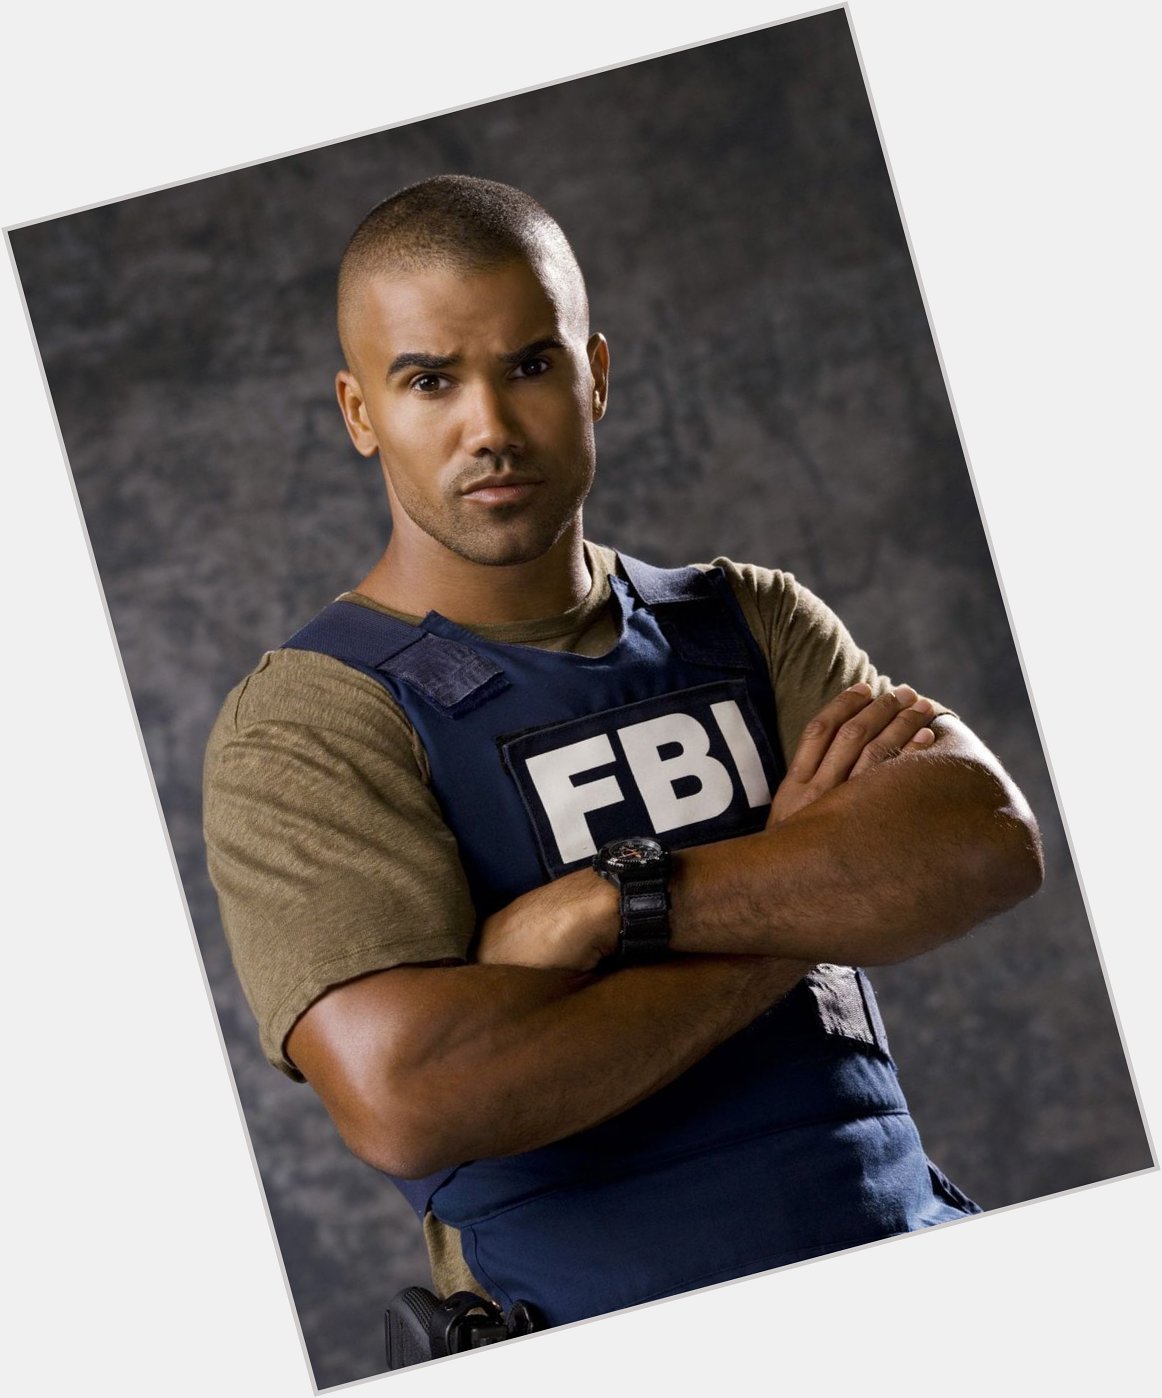 Happy Birthday to Shemar Moore, who turns 45 today! 